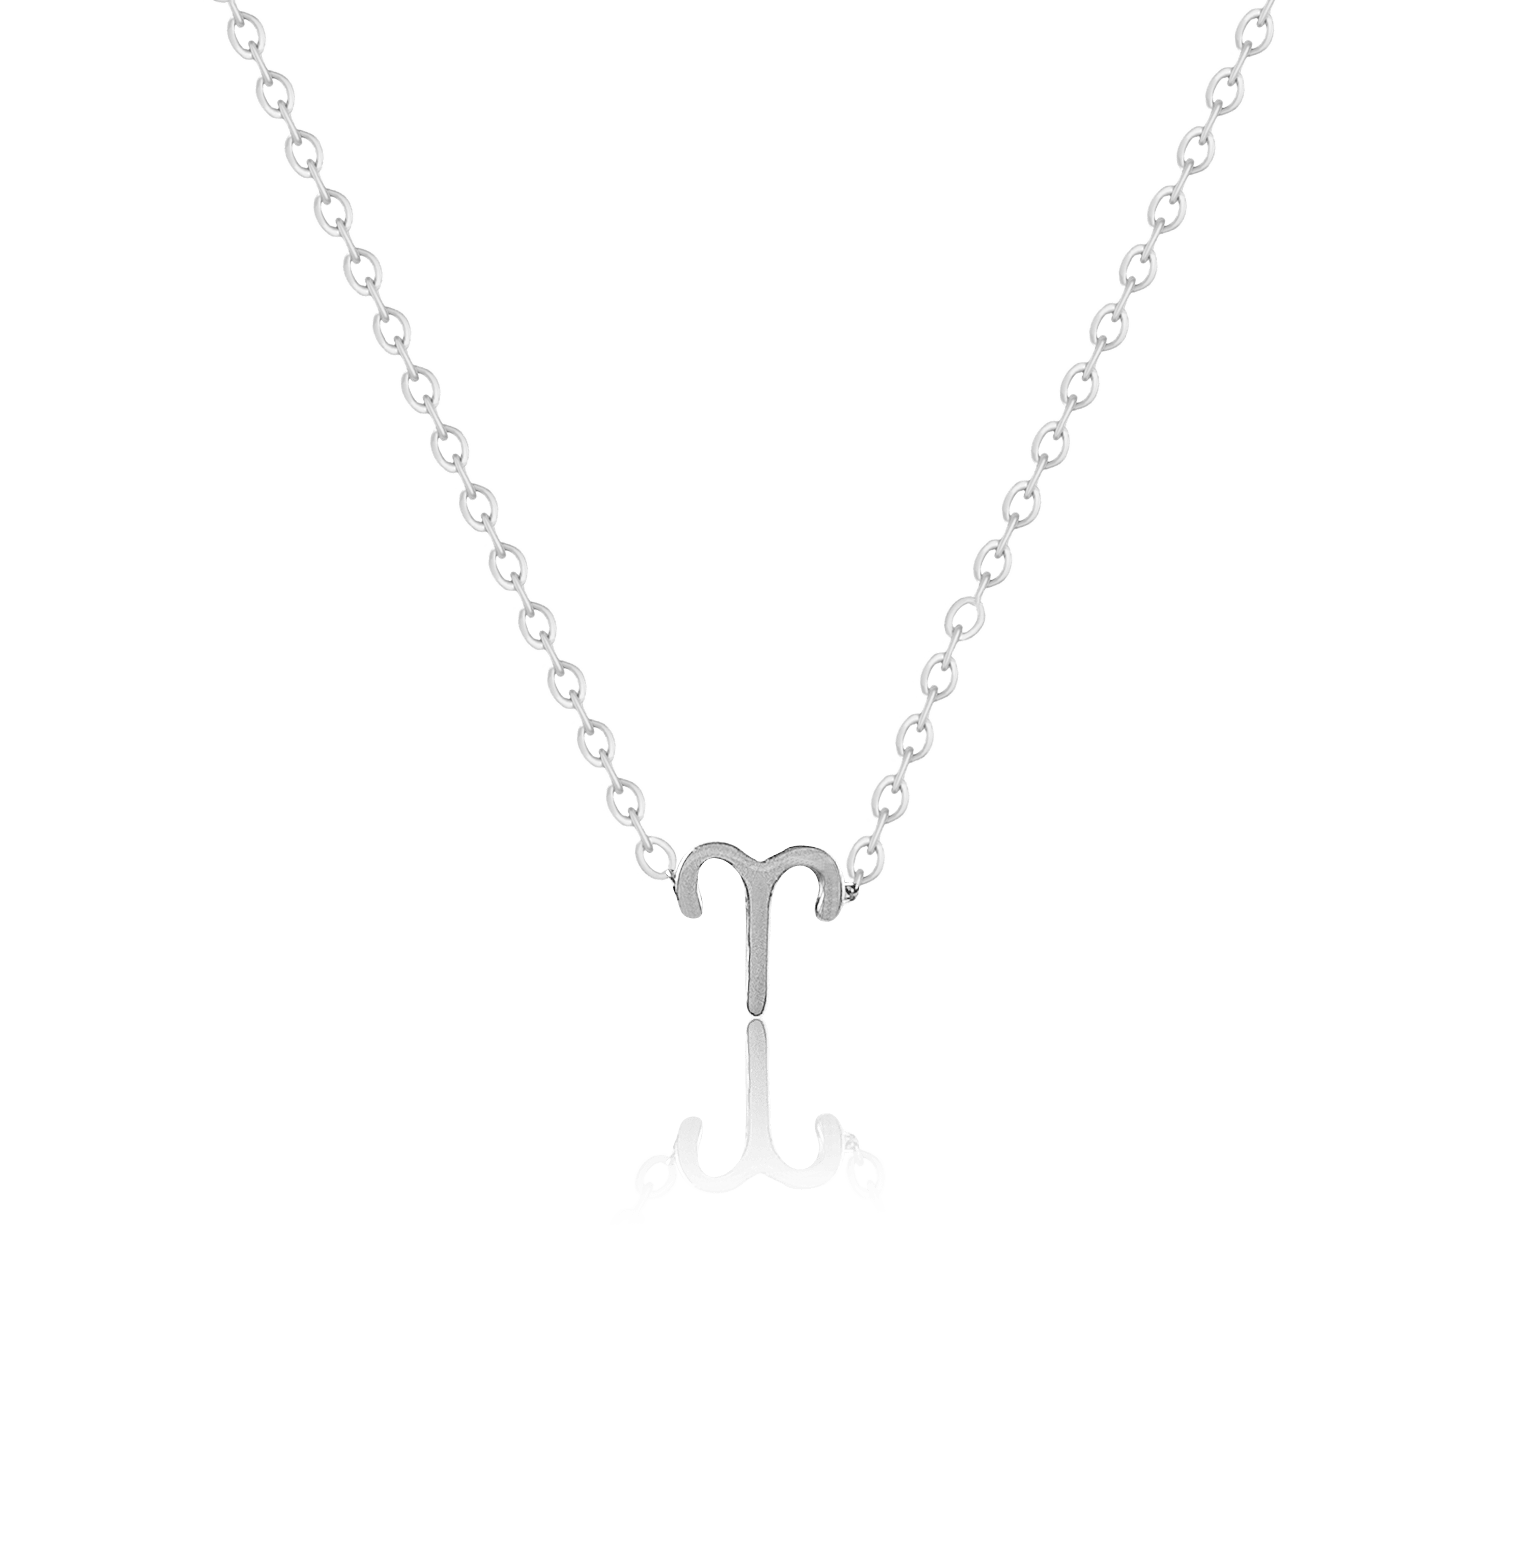 bianco rosso Necklaces Silver Aries - Necklace cyprus greece jewelry gift free shipping europe worldwide